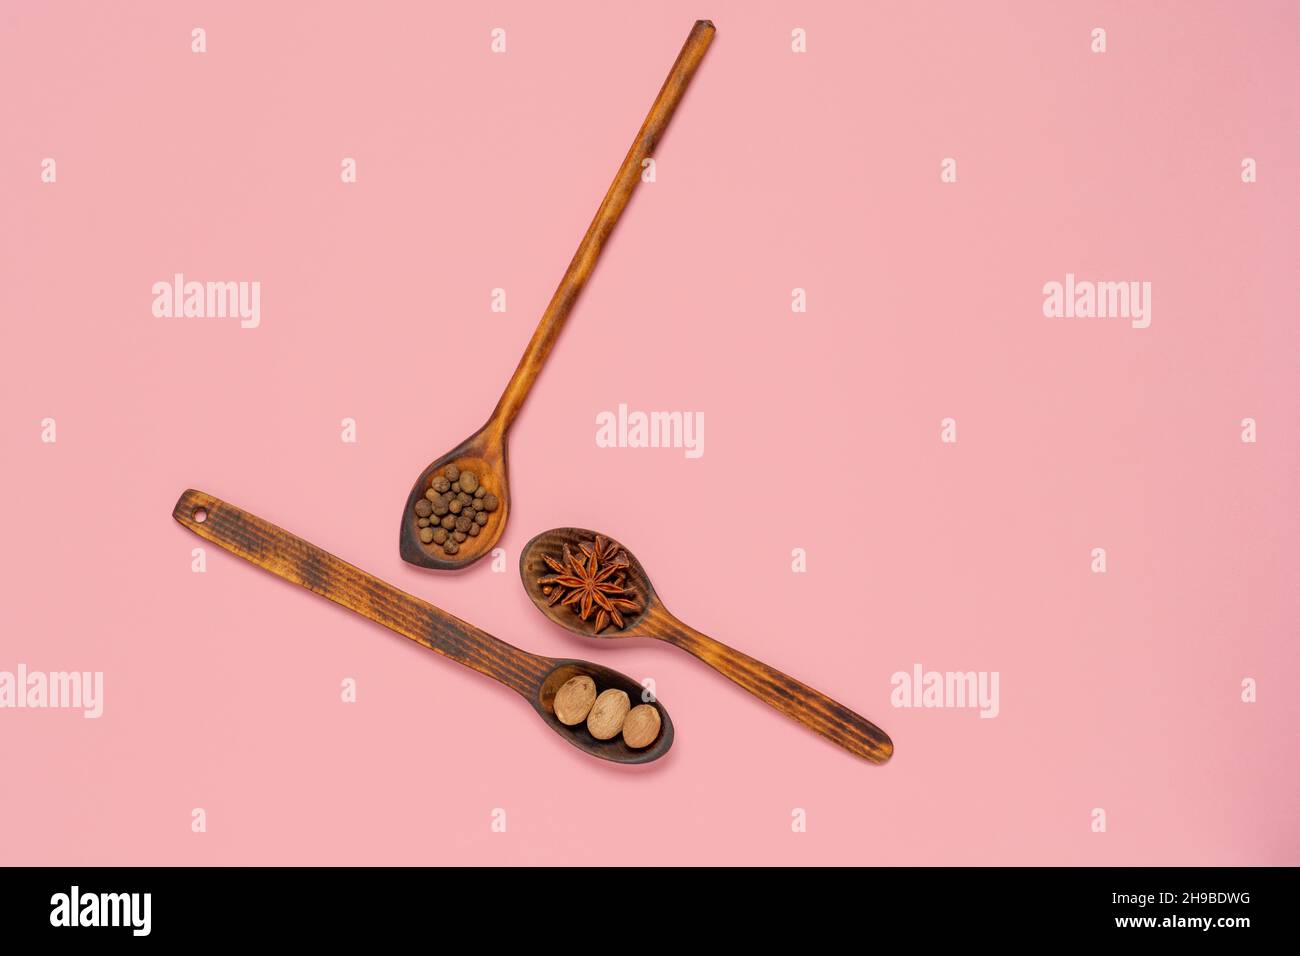 anise star, nutmeg and allspice in spoon on colorful background with copy space. Flat lay background Stock Photo